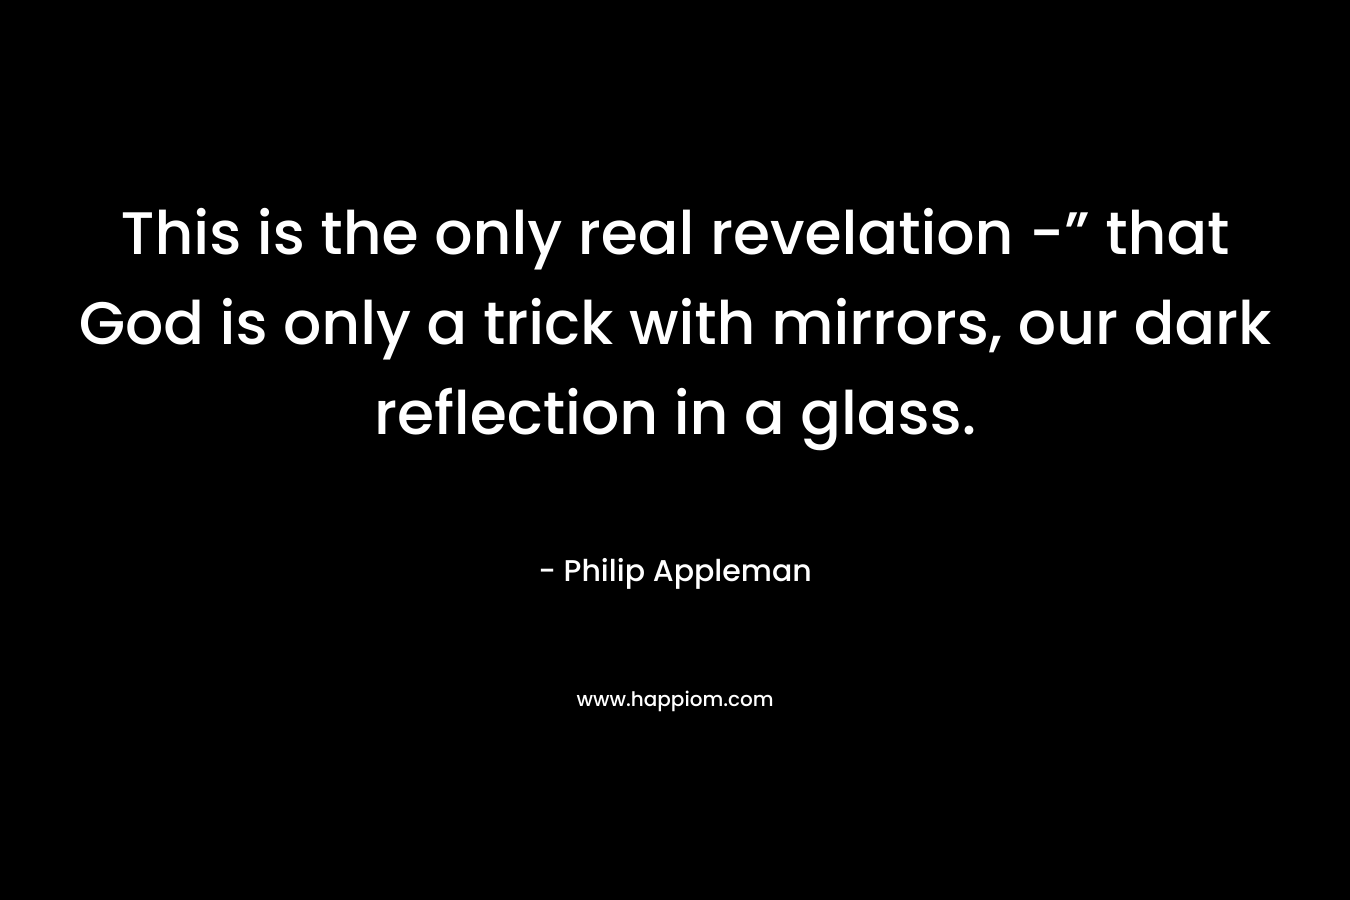 This is the only real revelation -” that God is only a trick with mirrors, our dark reflection in a glass. – Philip Appleman